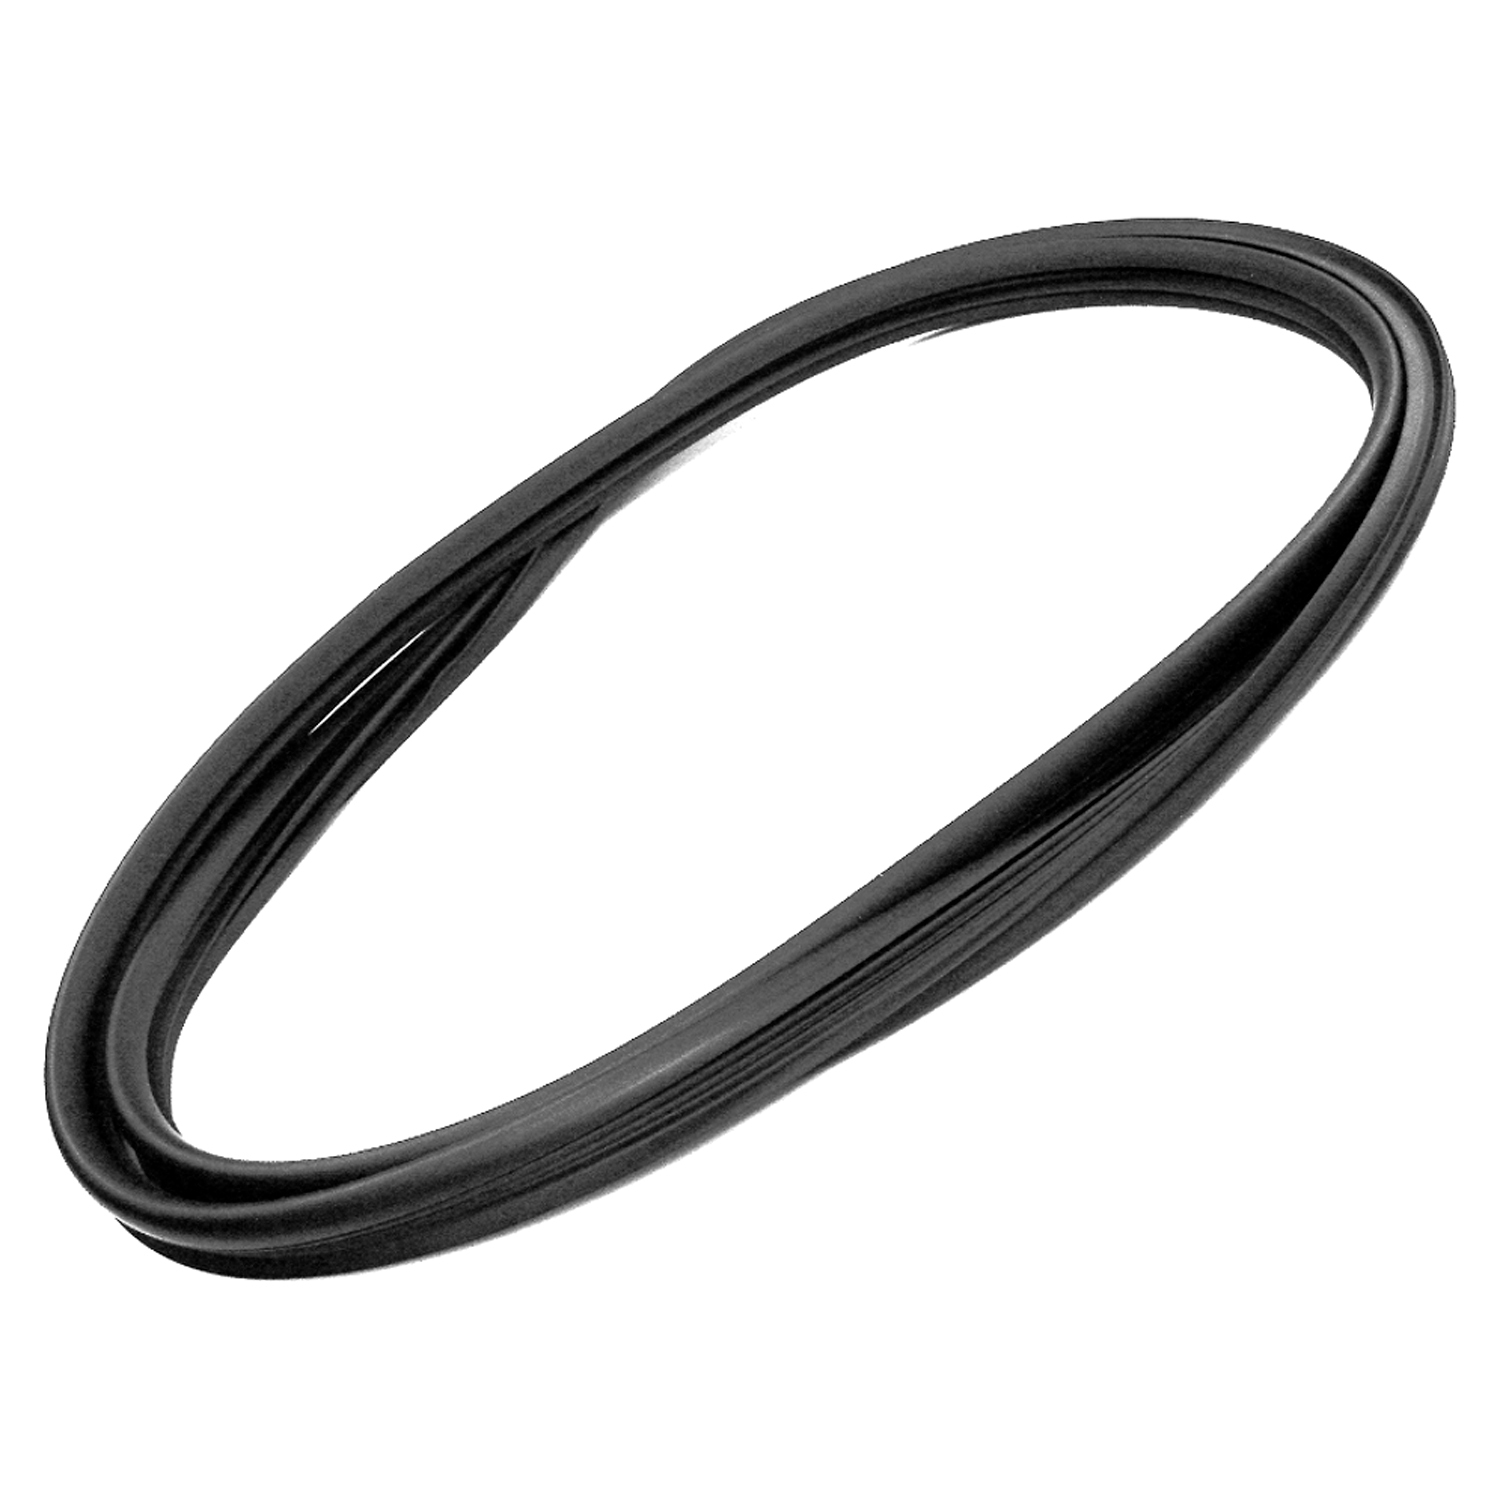 1978 Chevrolet C10 Suburban Windshield Seal, 73-87 GM Full Size Truck, 73-91 GM SUV, Without Trim Groove-VWS 7313-D